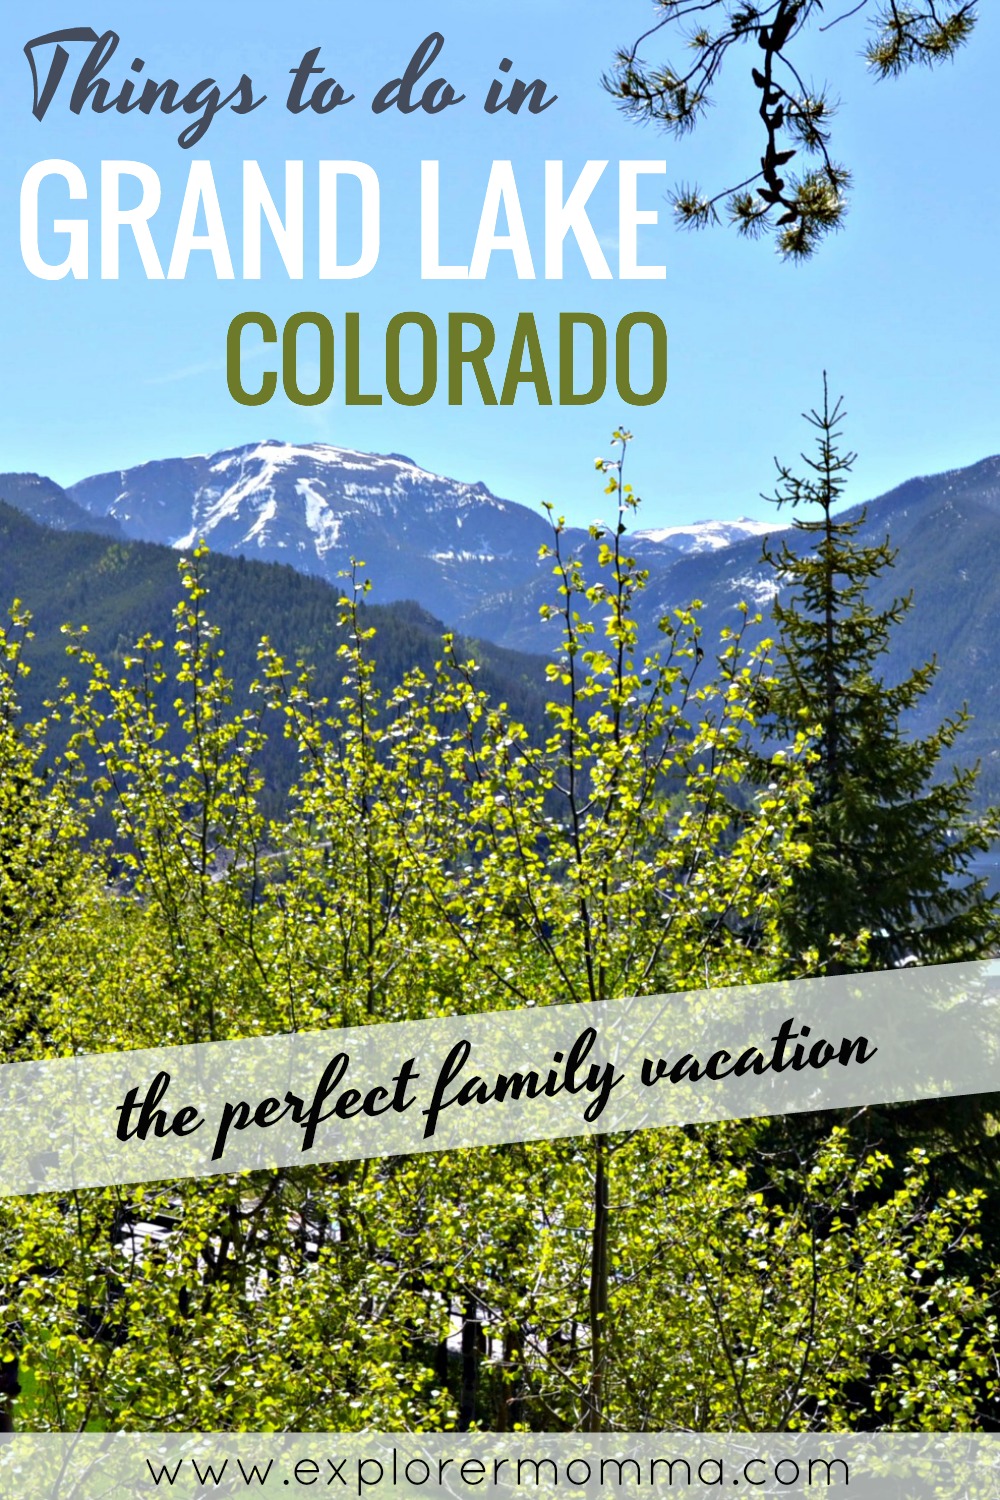 Things to do in Grand Lake Colorado, Mount Baldy